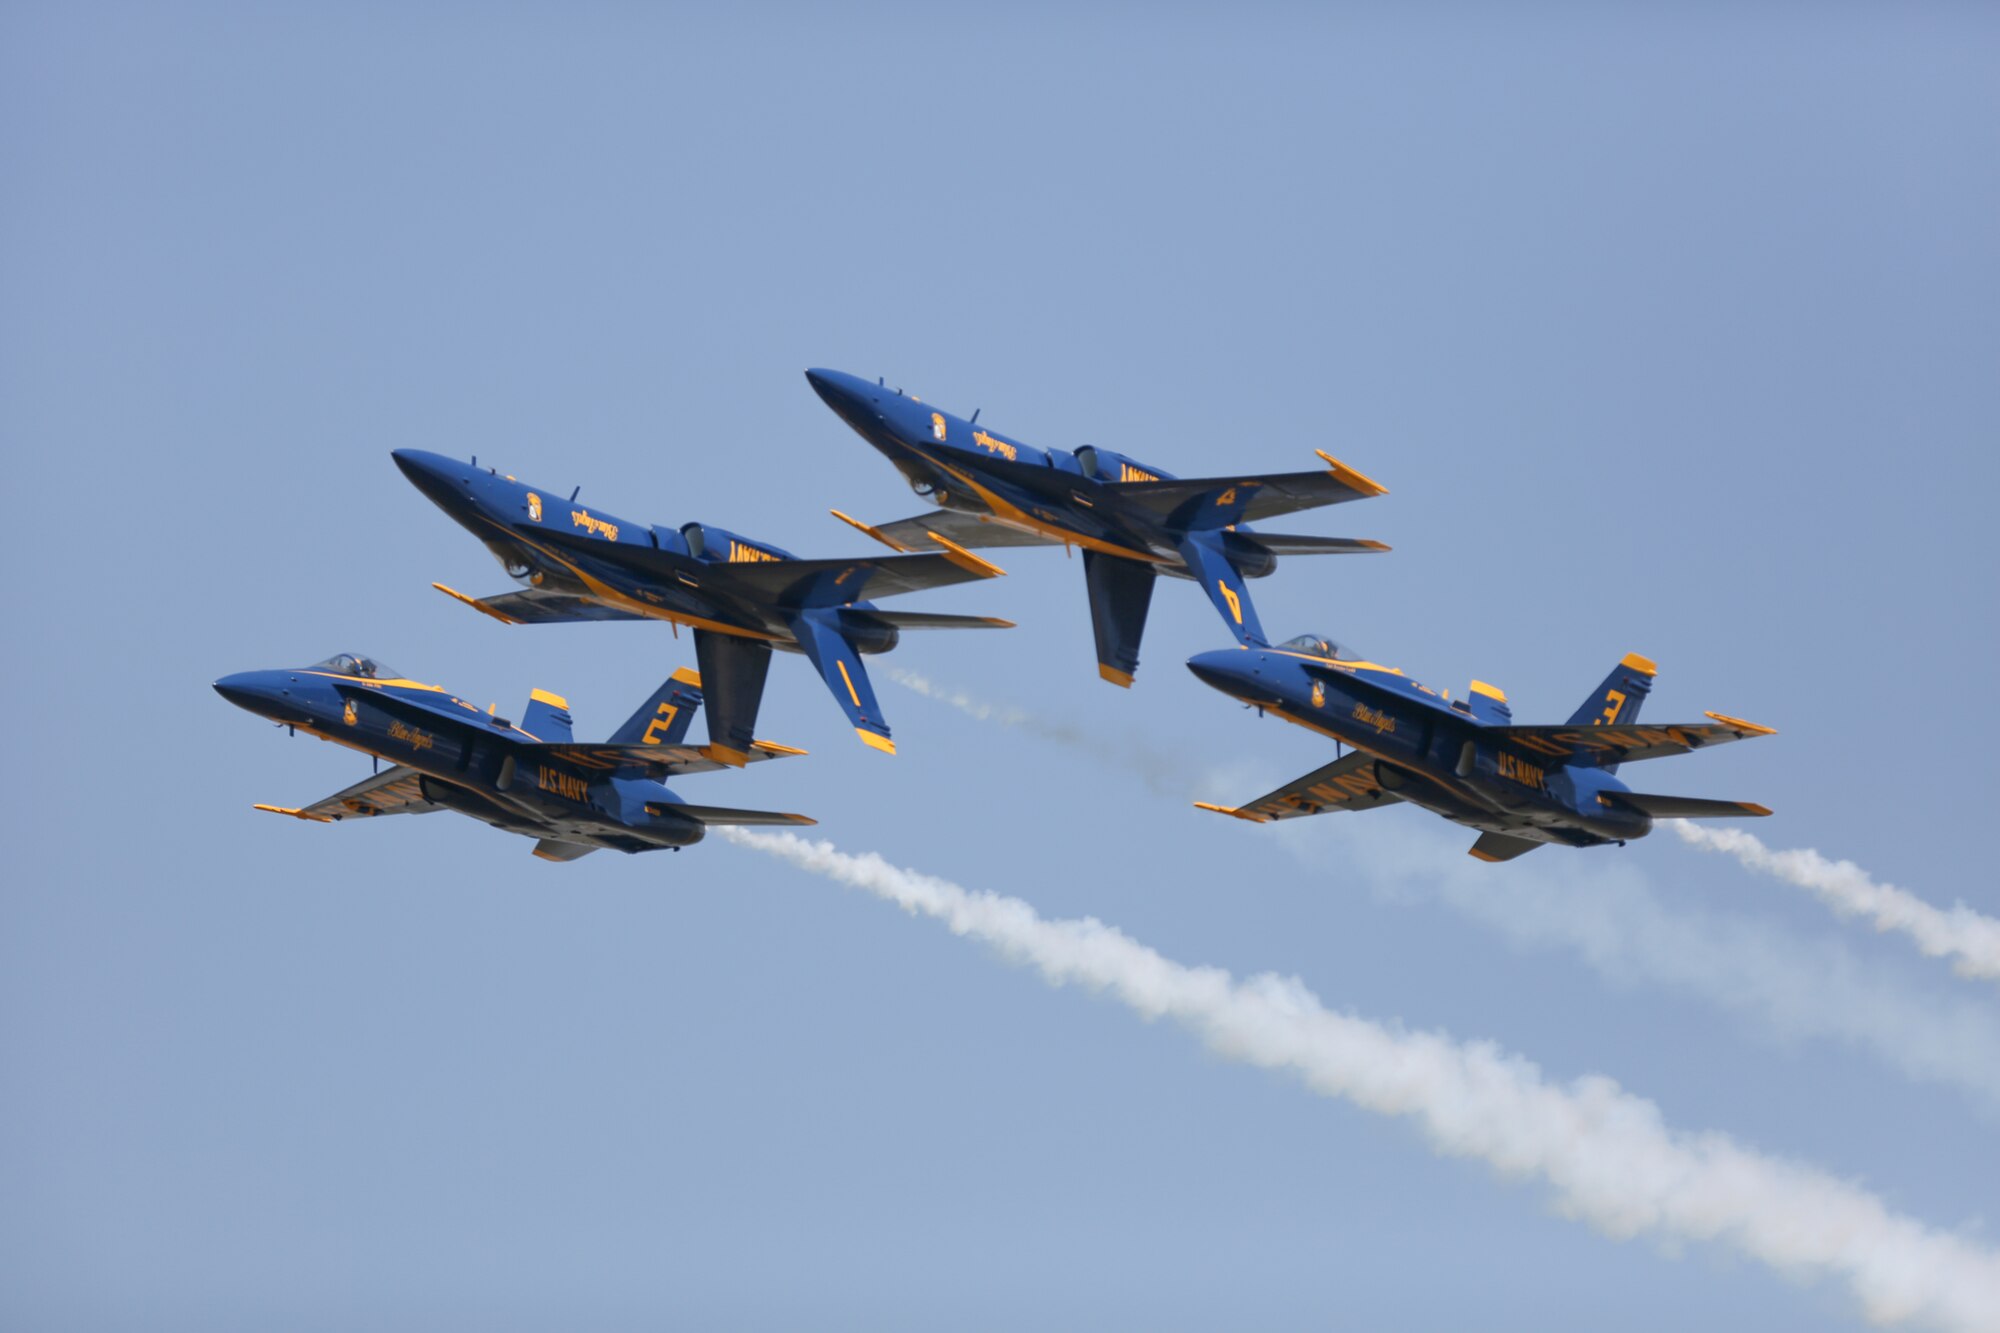 Blue Angels perform at the 2012 Robins Air Show. (U.S. Air Force photo by 1st Lt. Joel Cooke)